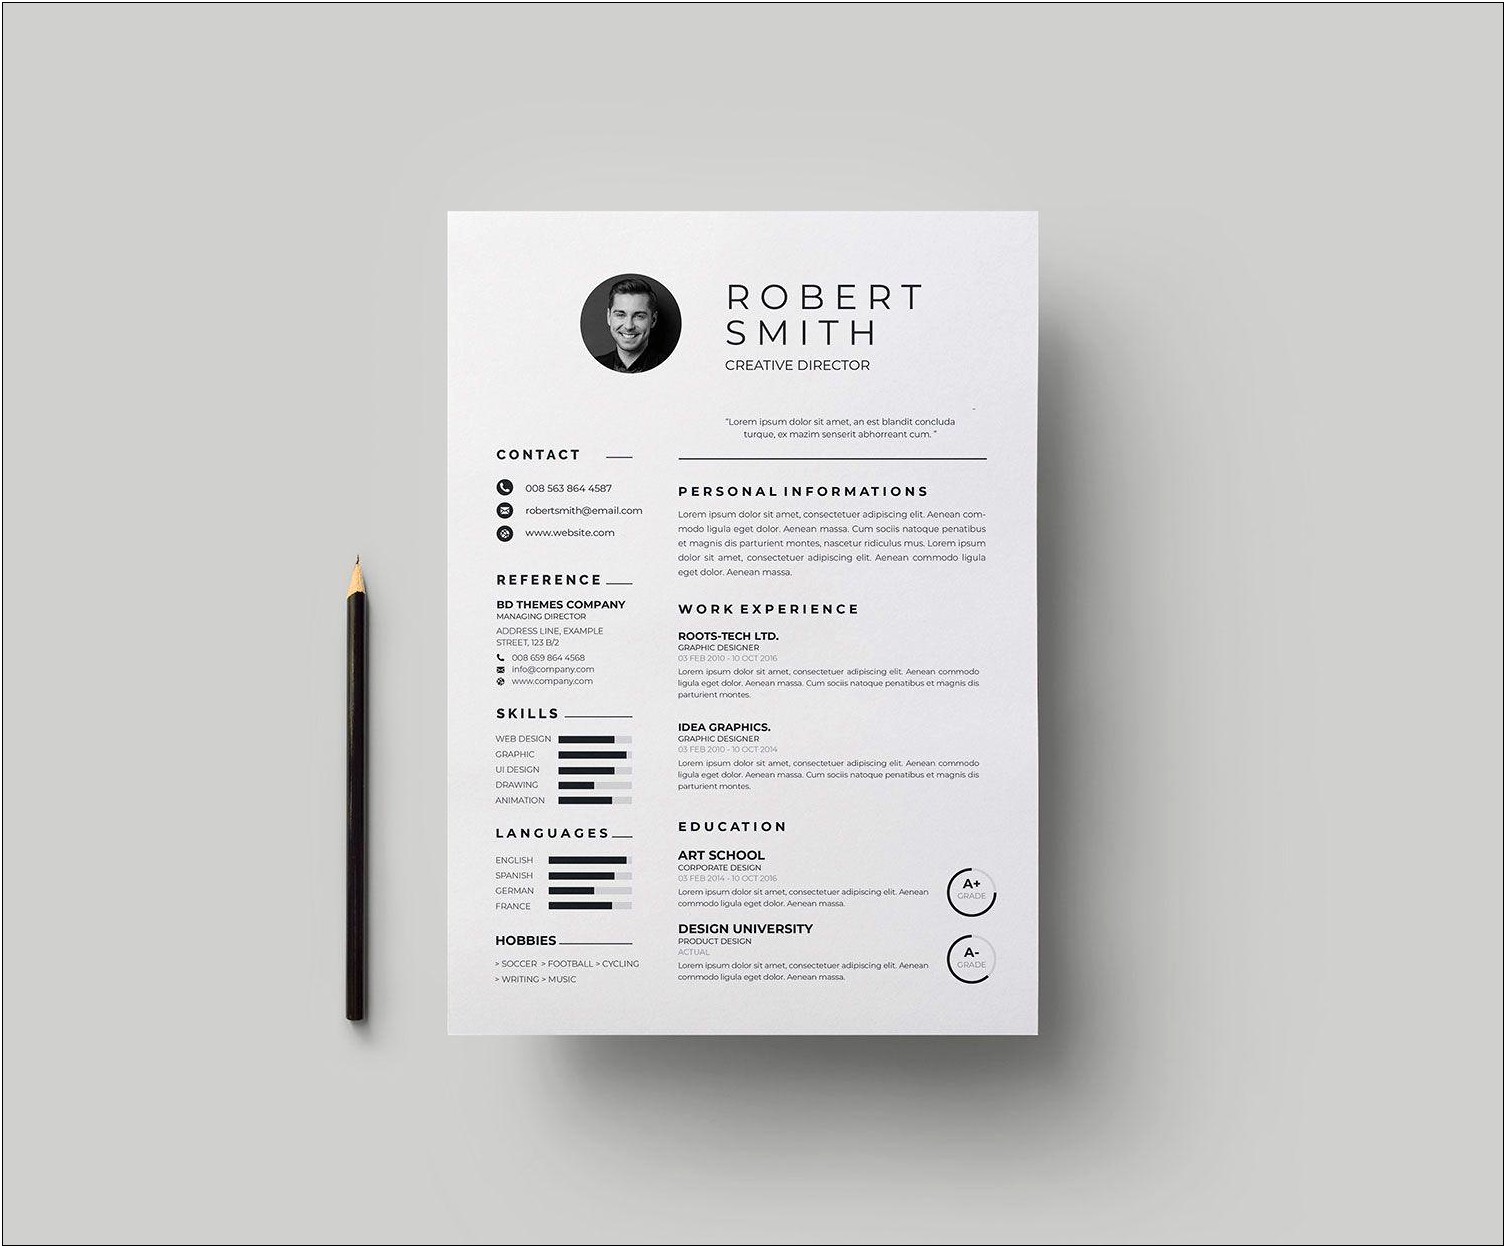 Best Way To Structure Resume